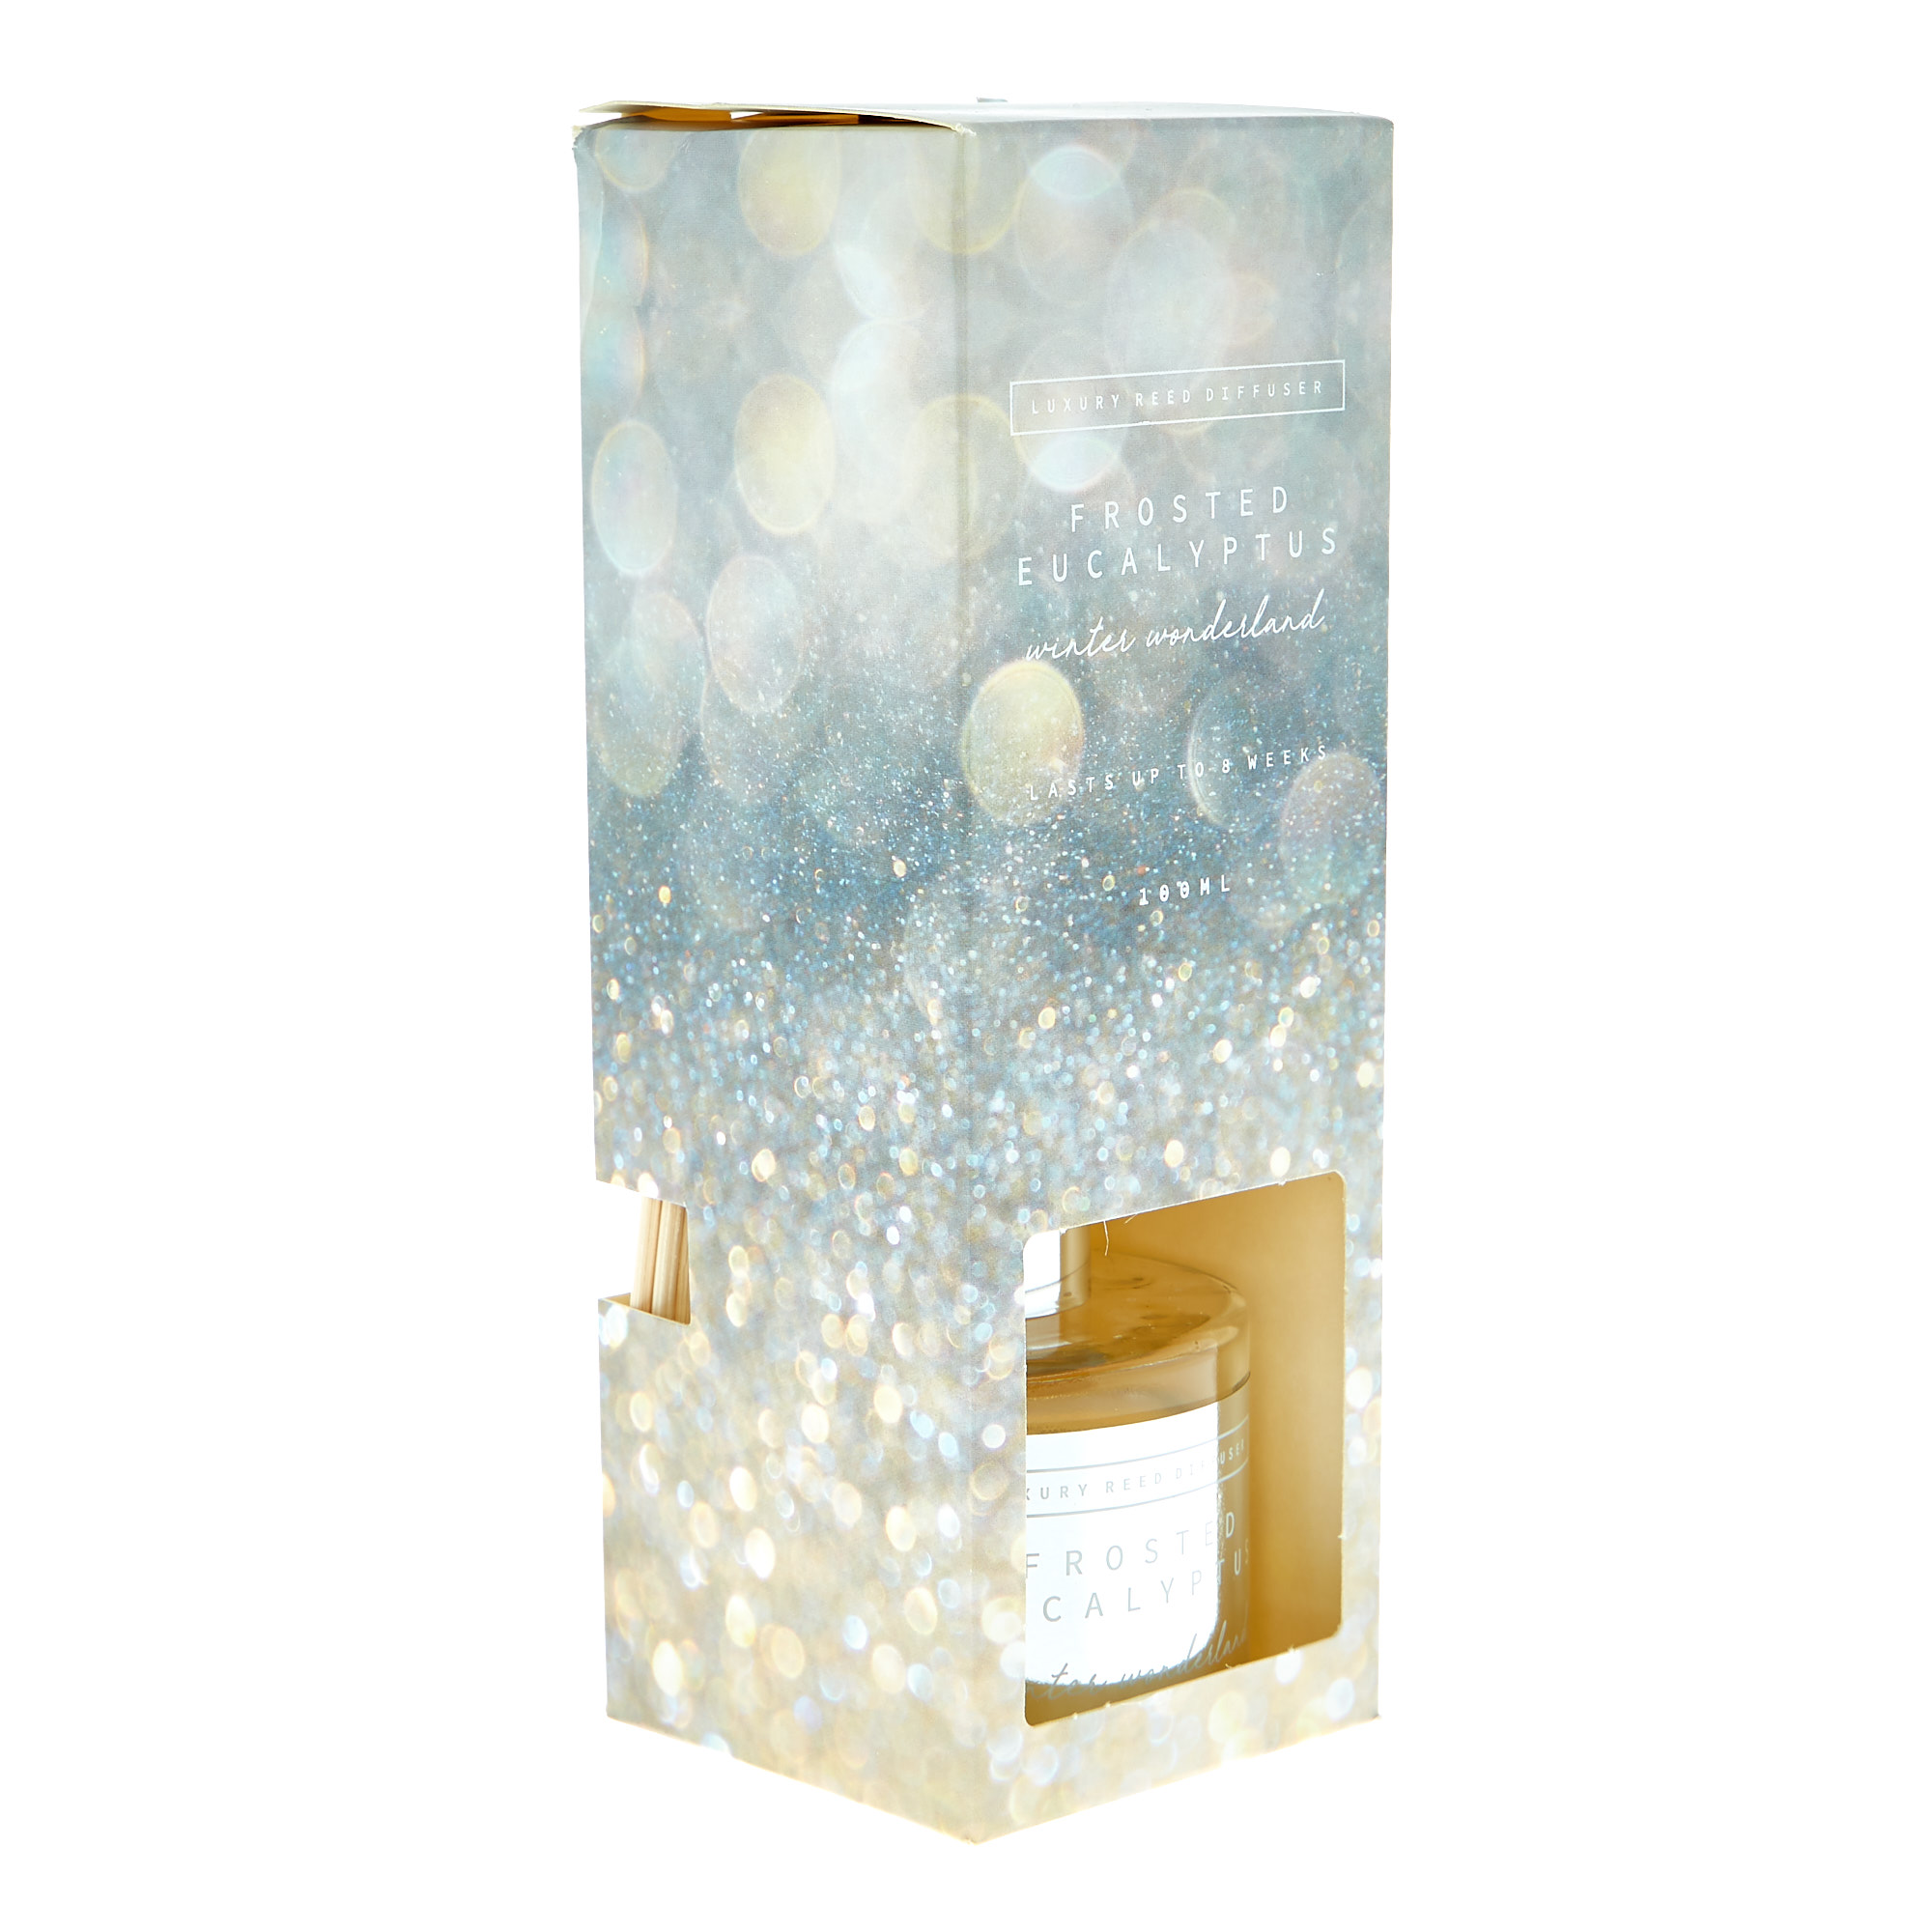 Frosted Eucalyptus Winter Wonderland Luxury Reed Diffuser 